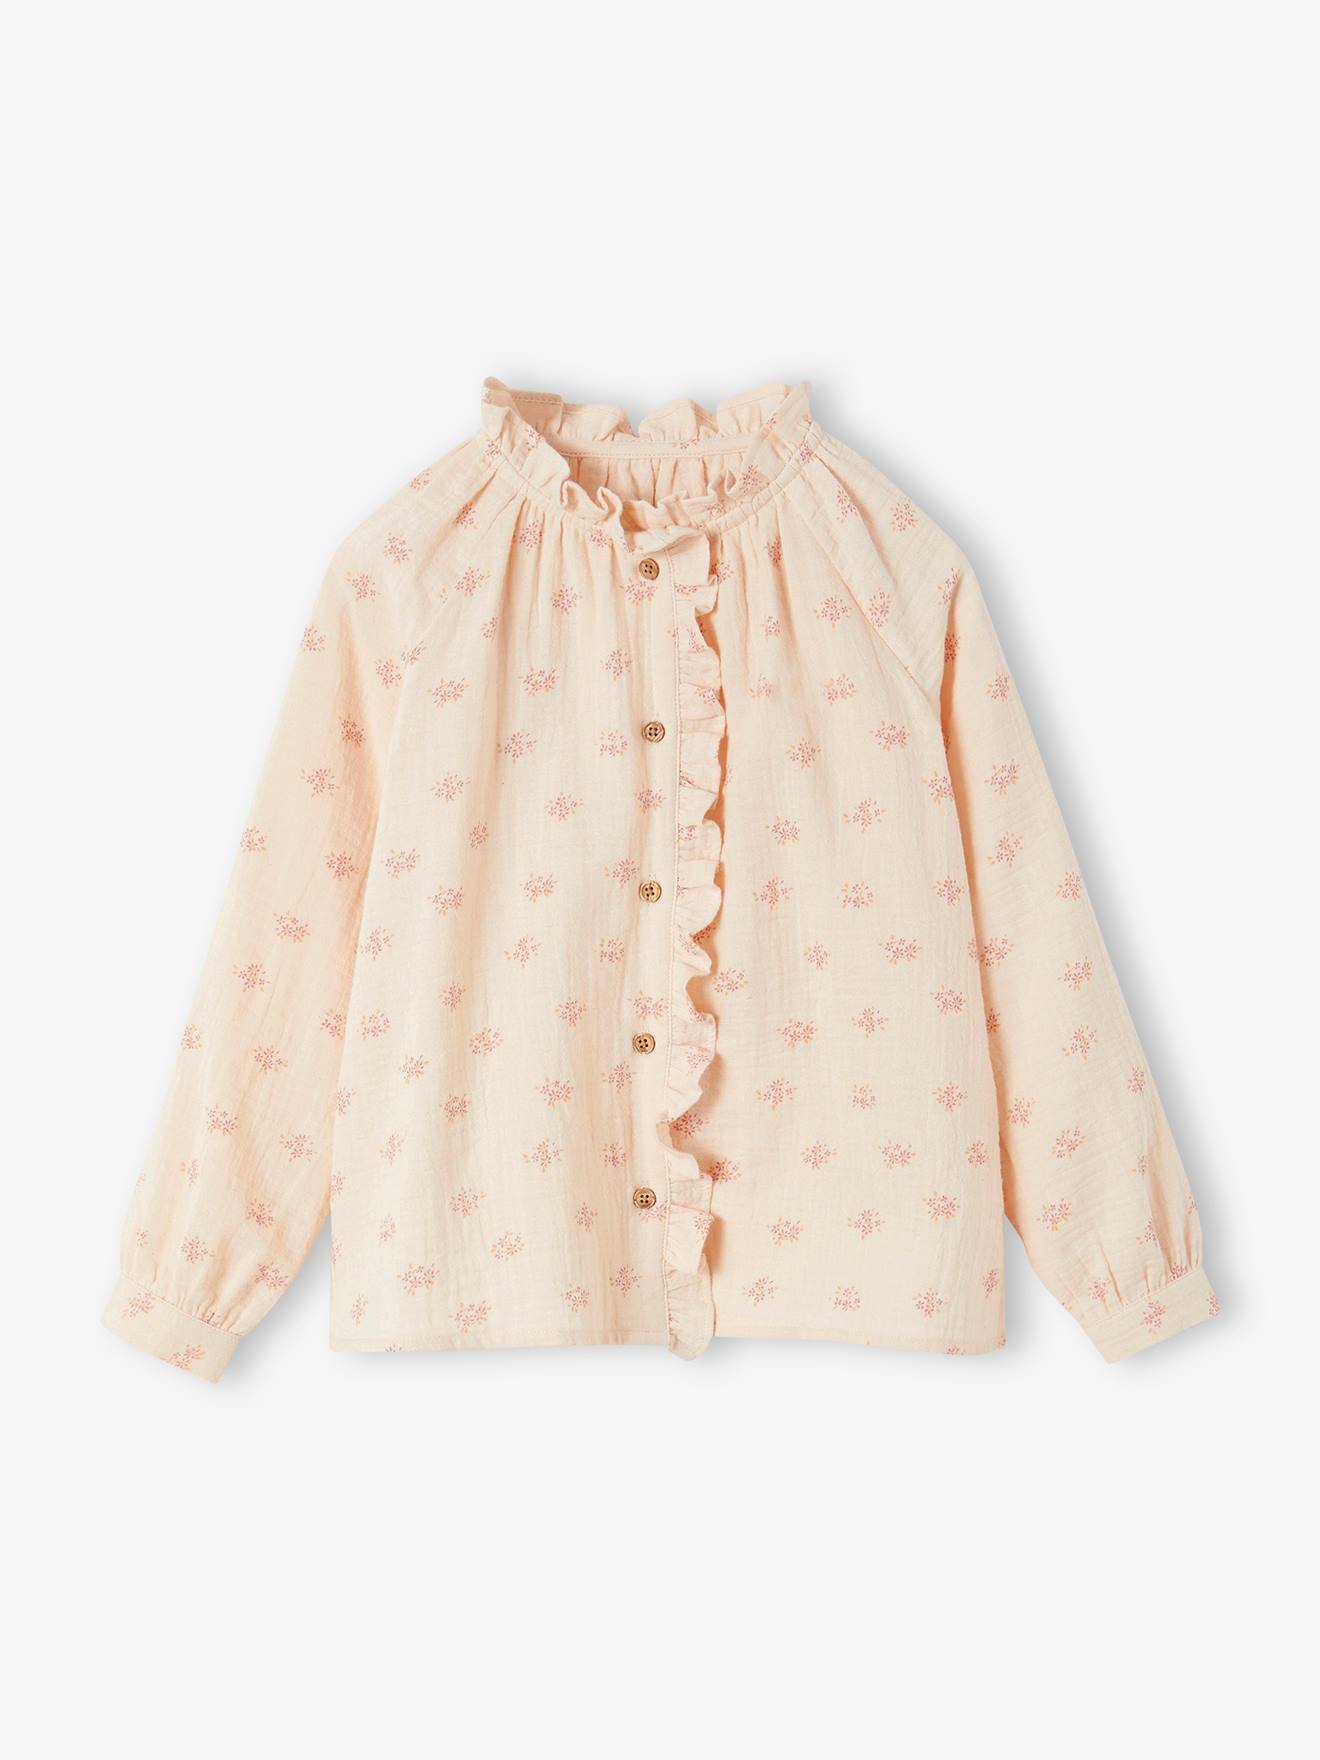 Blouse in Cotton Gauze with Ruffles & Floral Print, for Girls pale pink